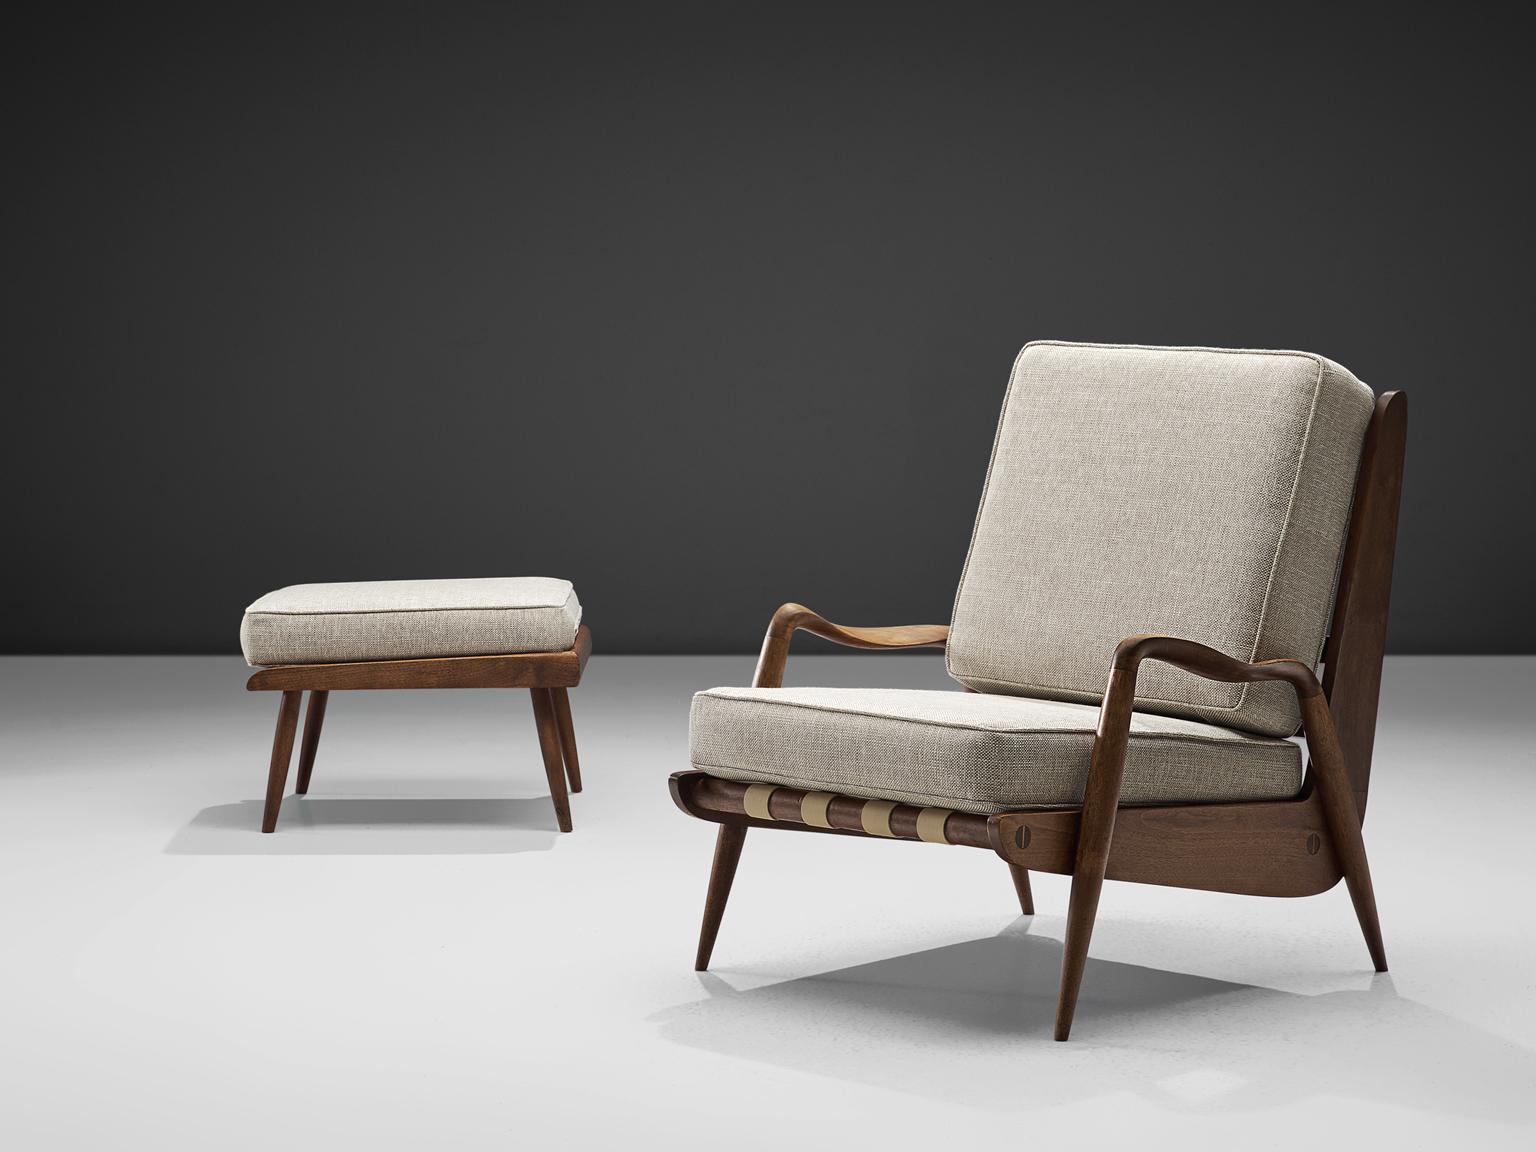 Philip Lloyd Powell, lounge chair with ottoman, american walnut and grey fabric, United States, 1960s. 

This sculptural armchair and matching ottoman are executed in American walnut and recently upholstered thick grey fabric. It is extremely rare